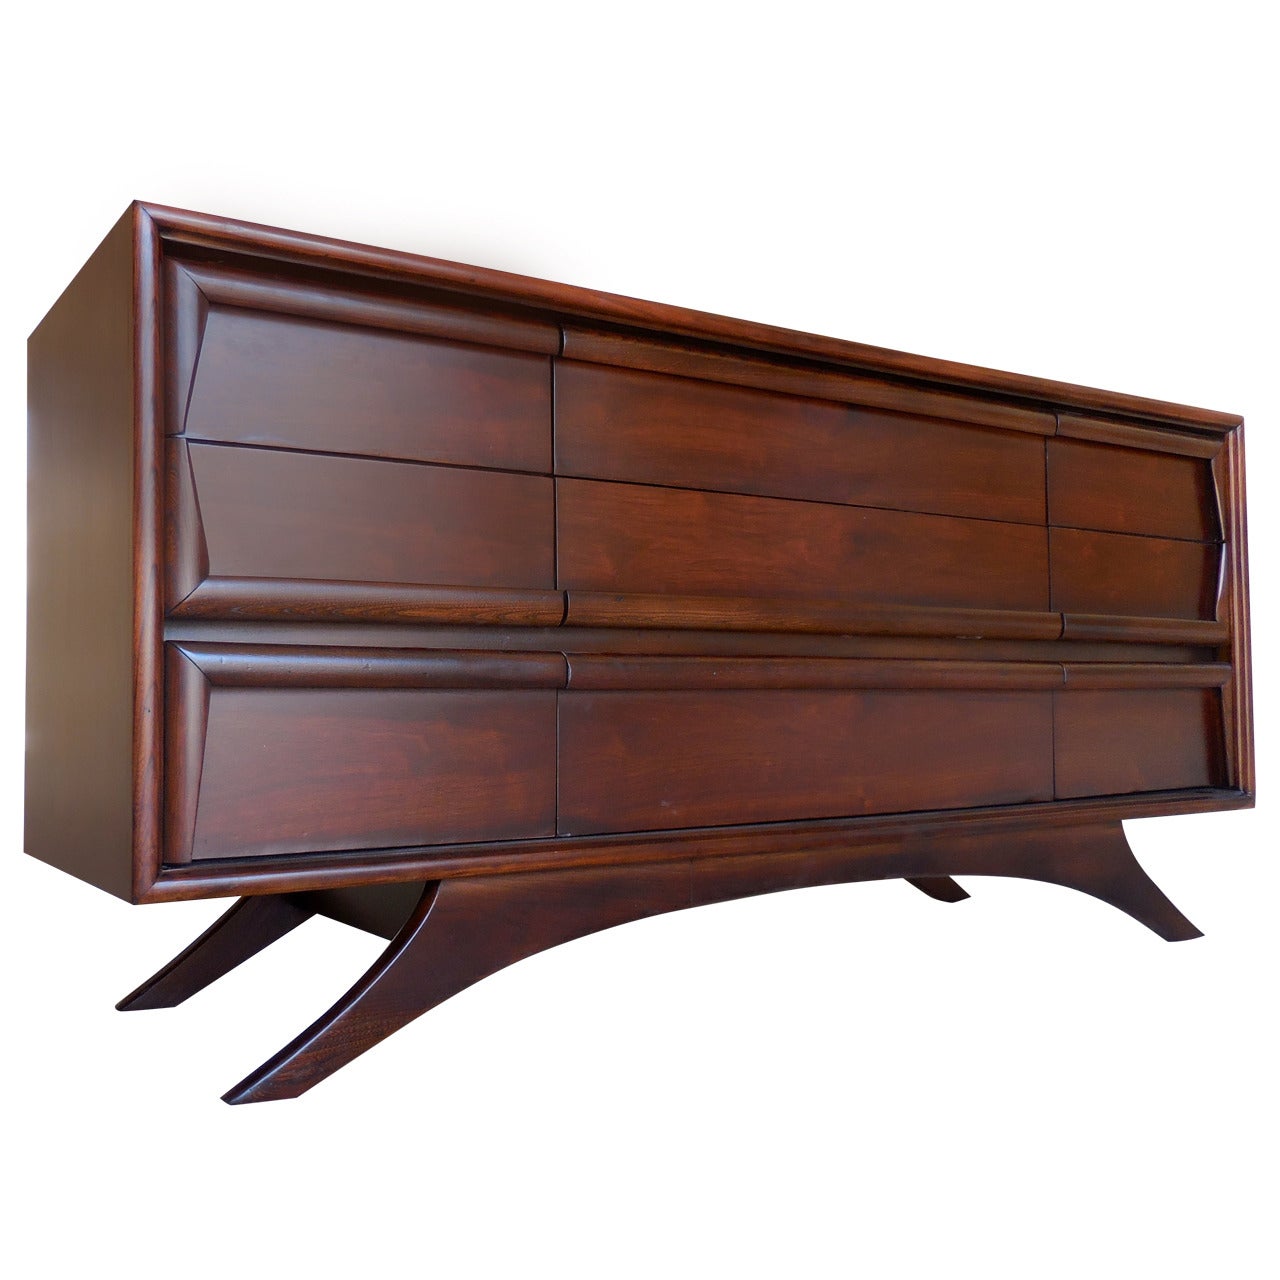 Nine-Drawer Walnut Chest in the Style of Vladimir Kagan Made by Kroehler